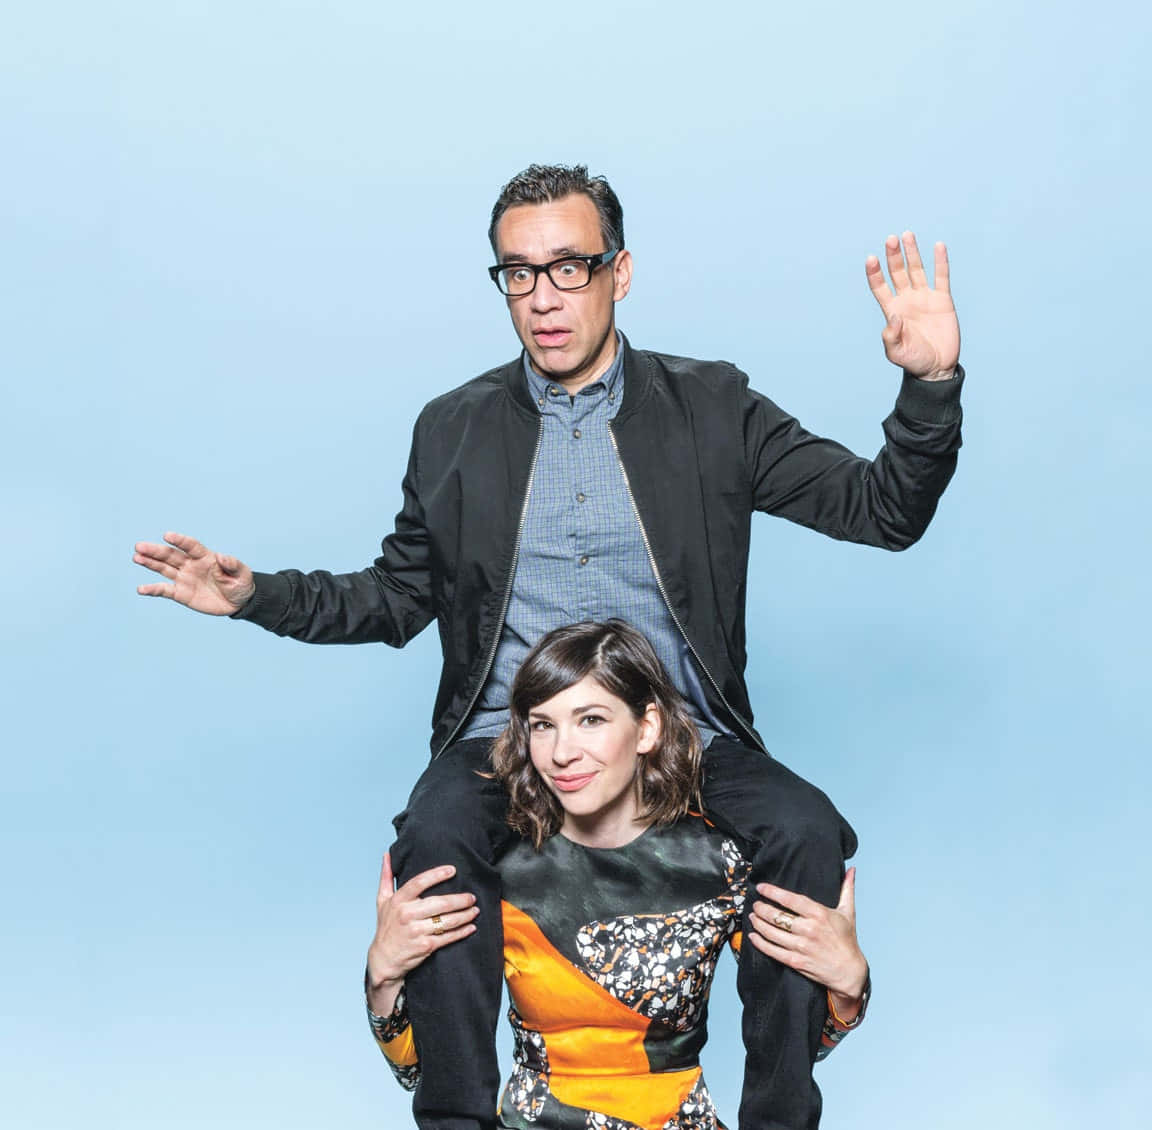 Comedic Genius Fred Armisen in a Lively Moment Wallpaper